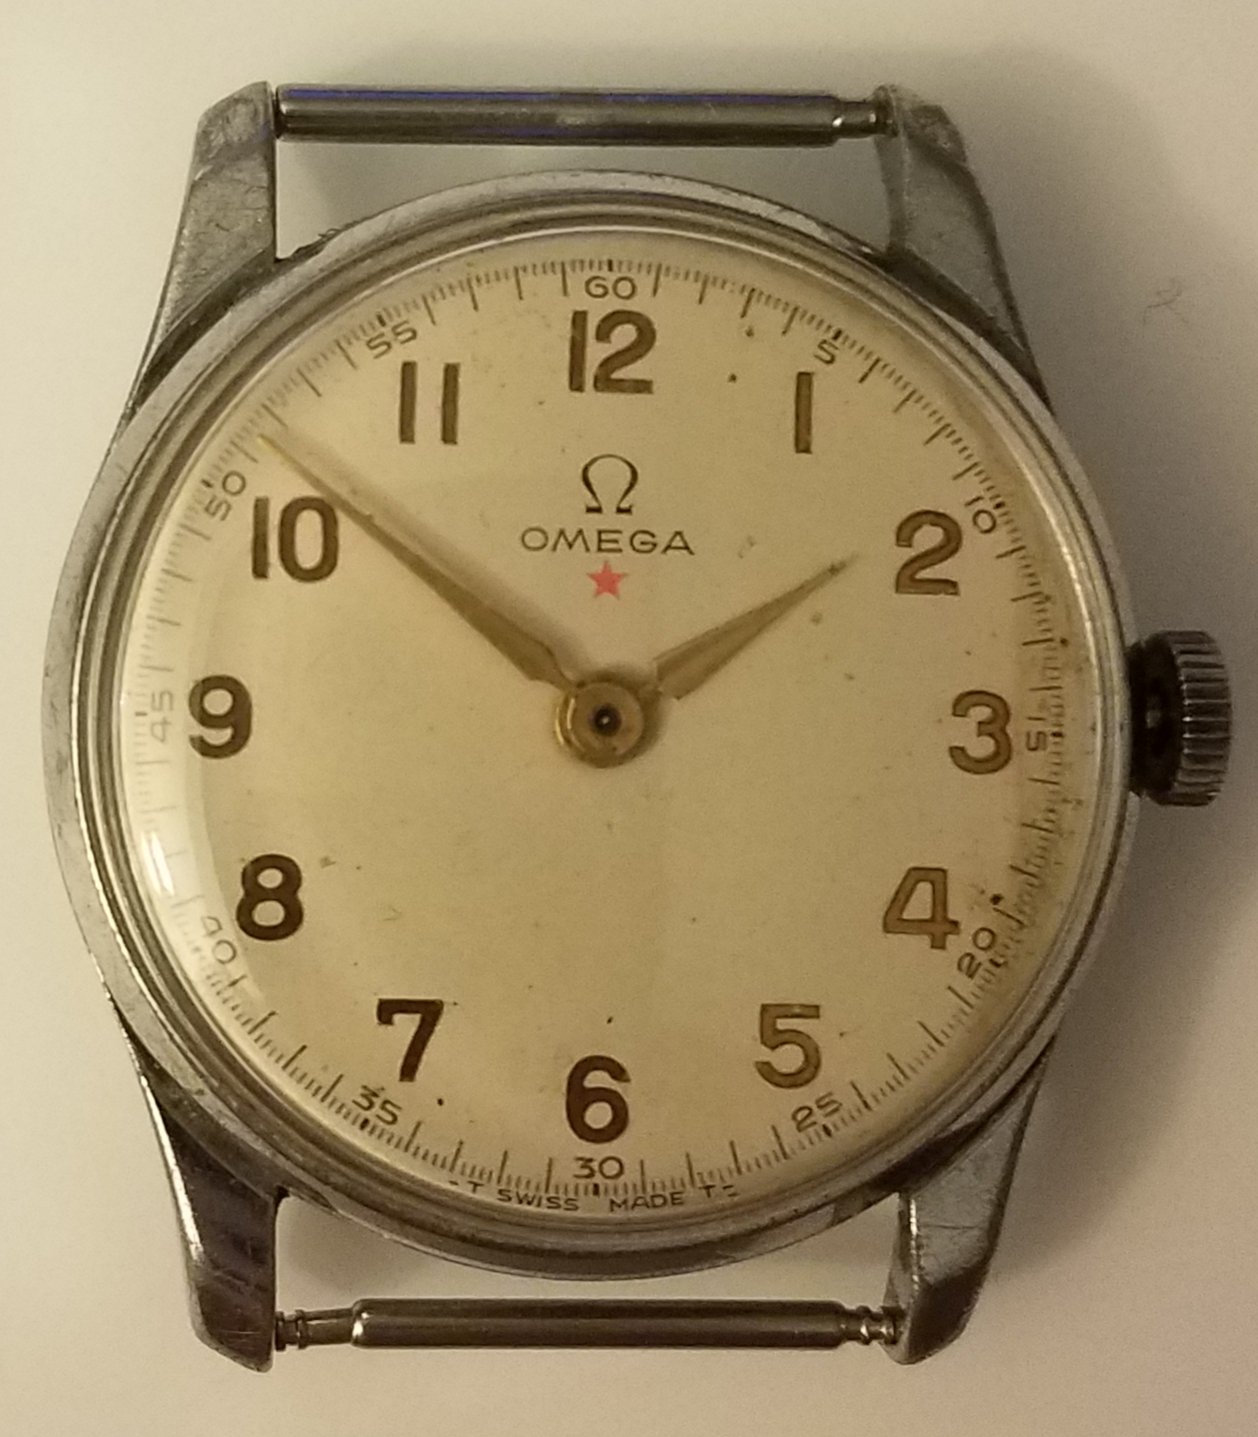 Significance of red star on dial? | Omega Forums